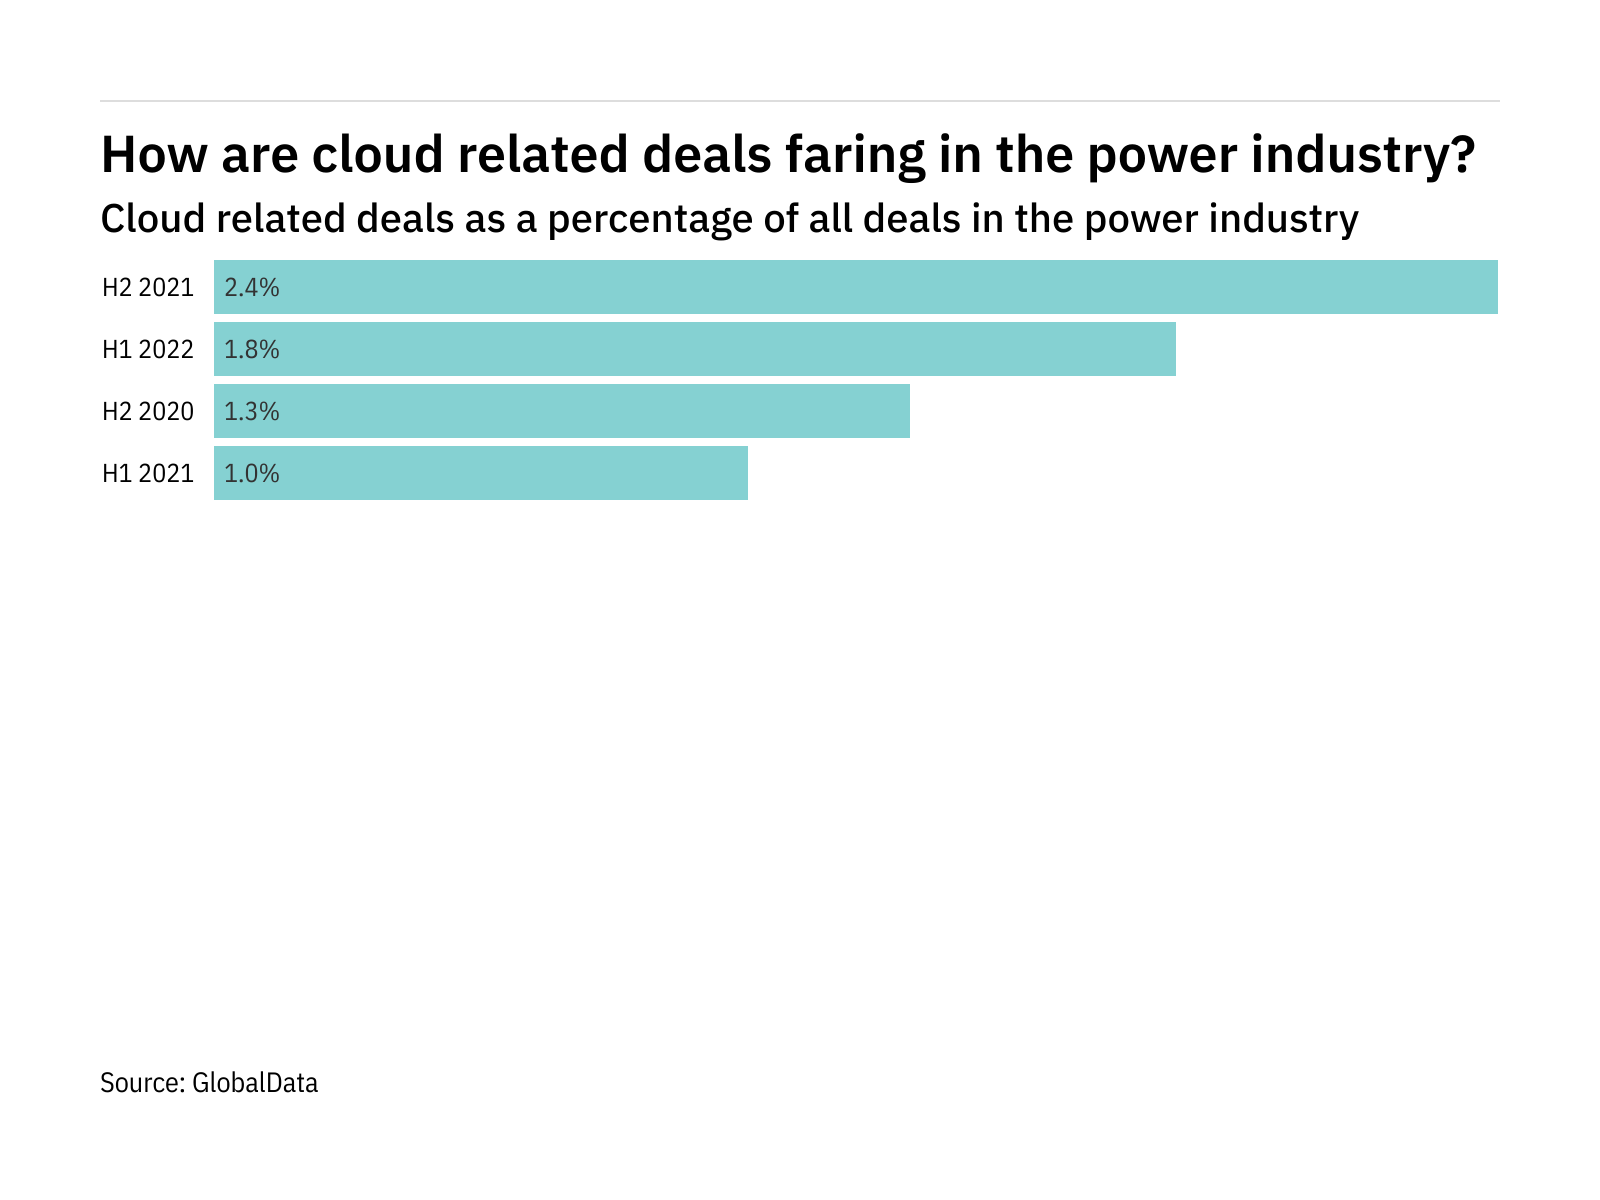 Deals relating to cloud increased significantly in the power industry in H1 2022